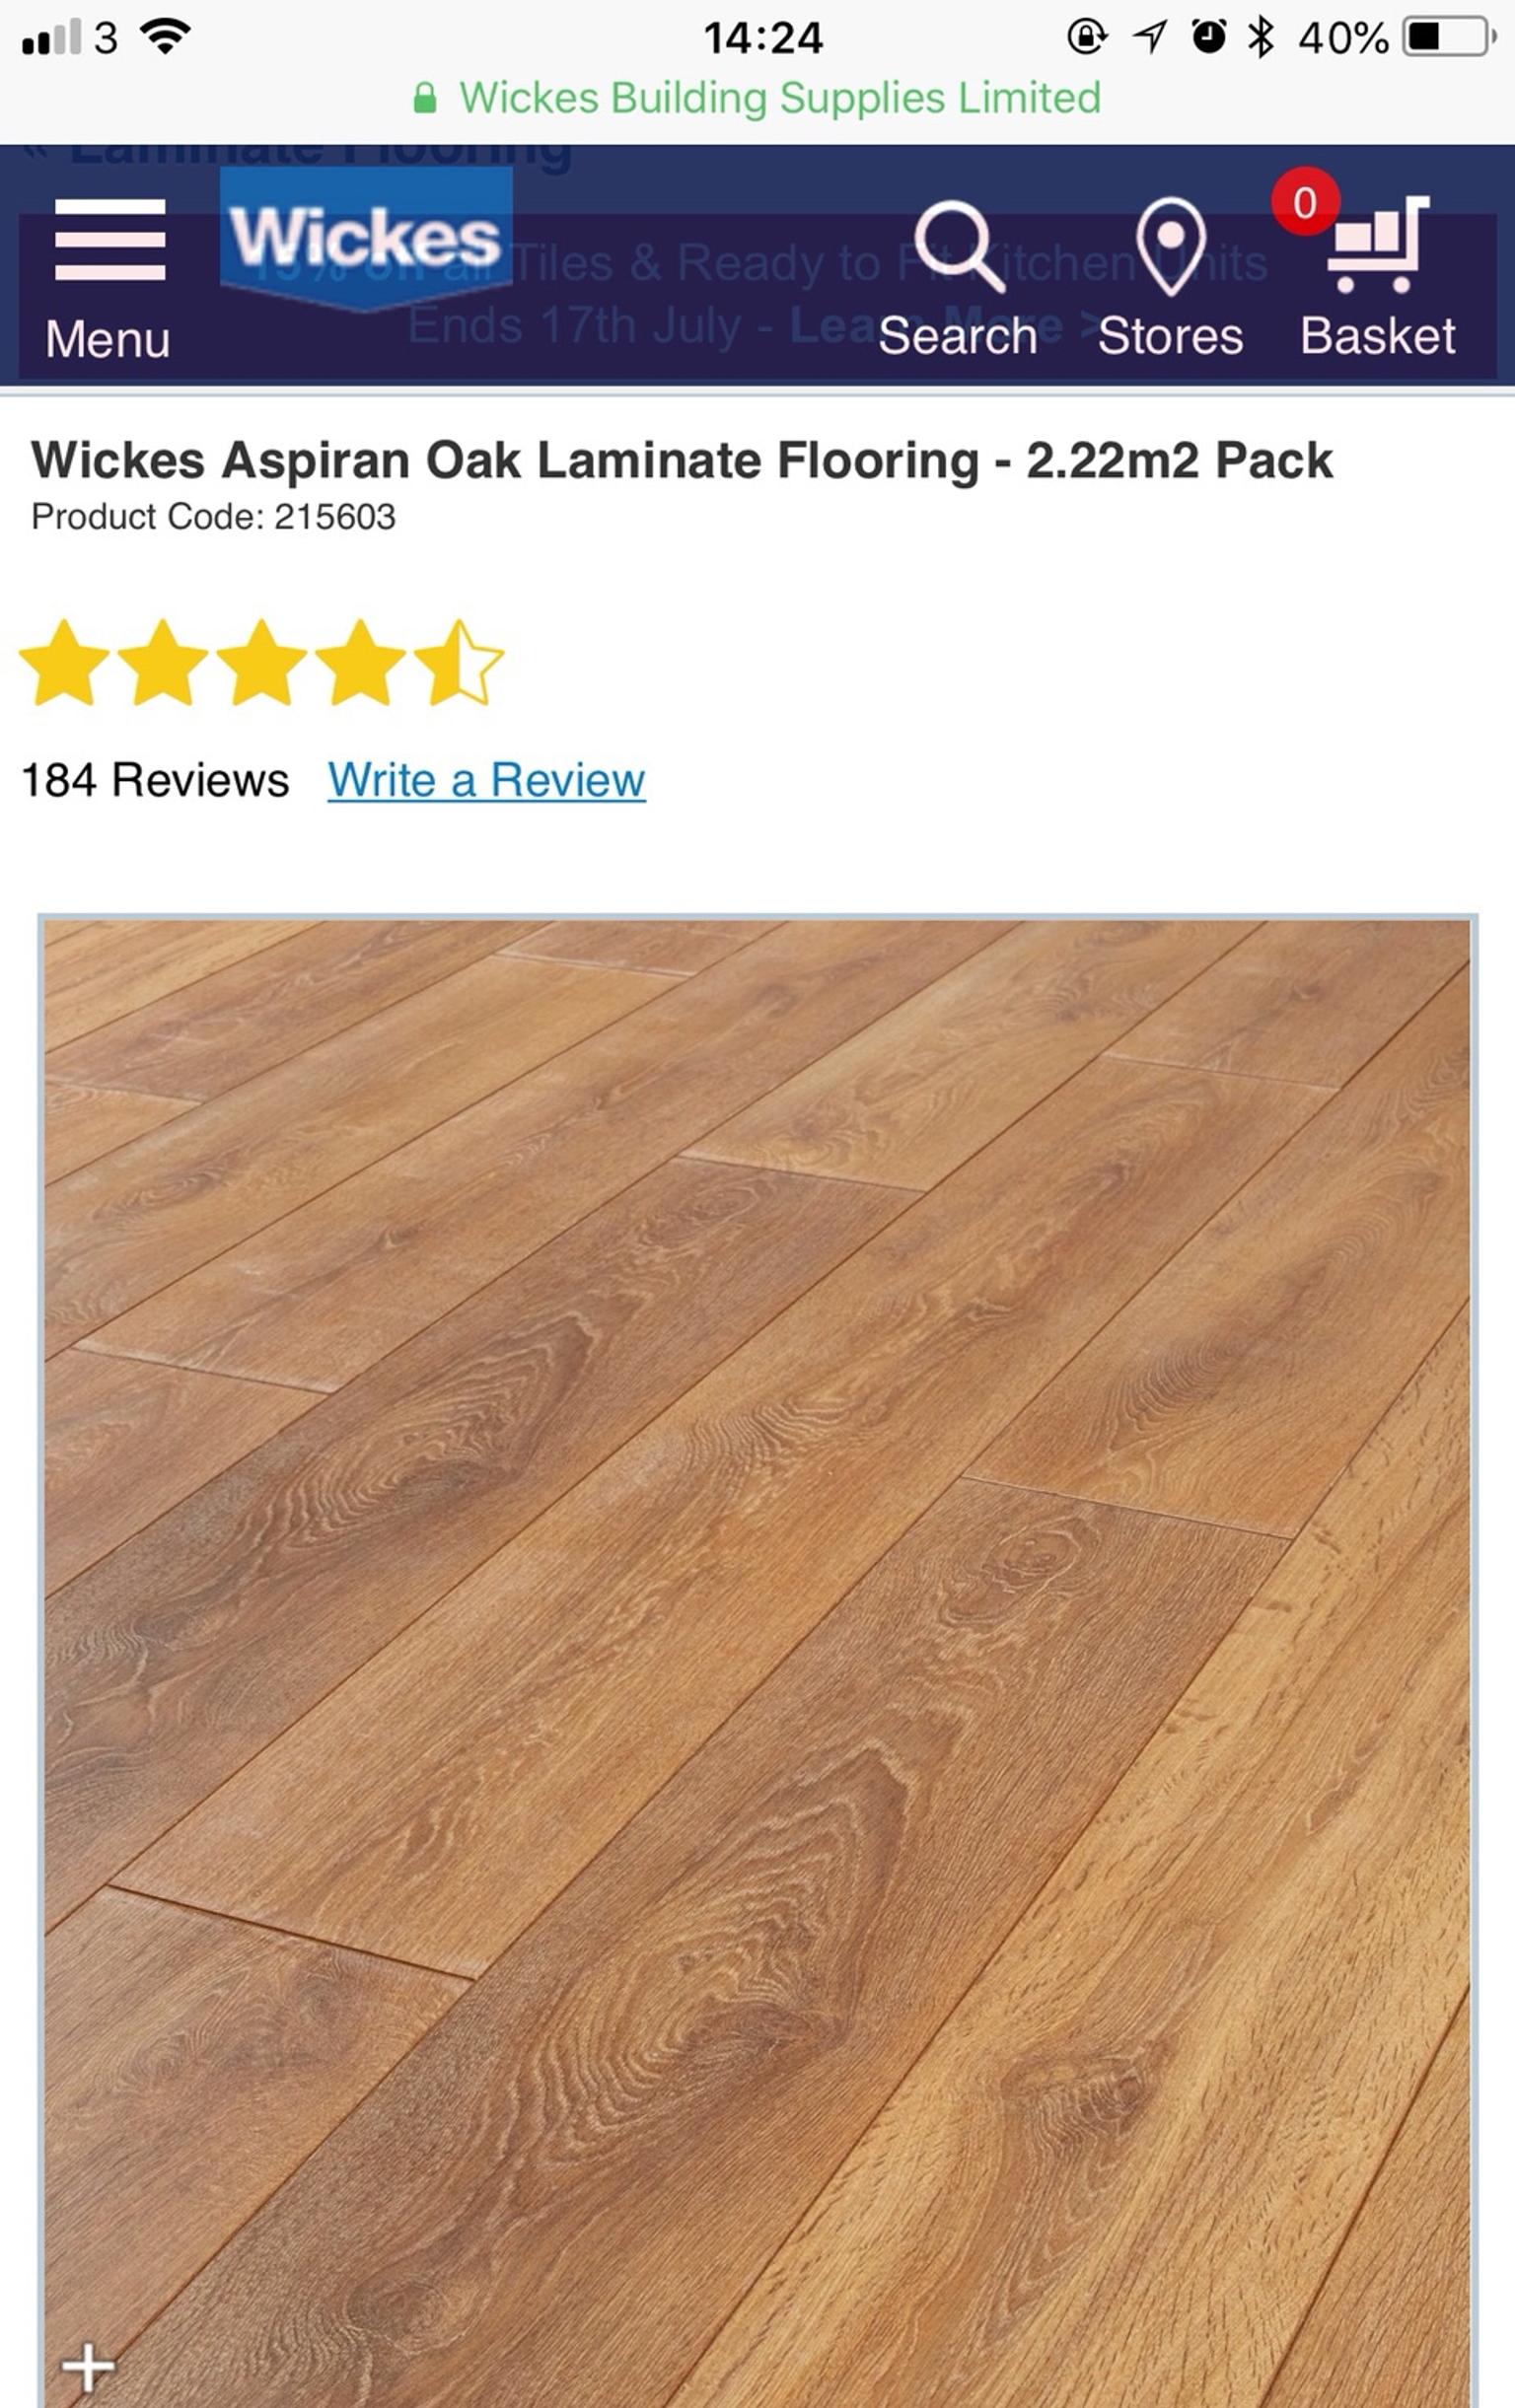 New Wickes Laminate In B64 Sandwell For 100 00 For Sale Shpock